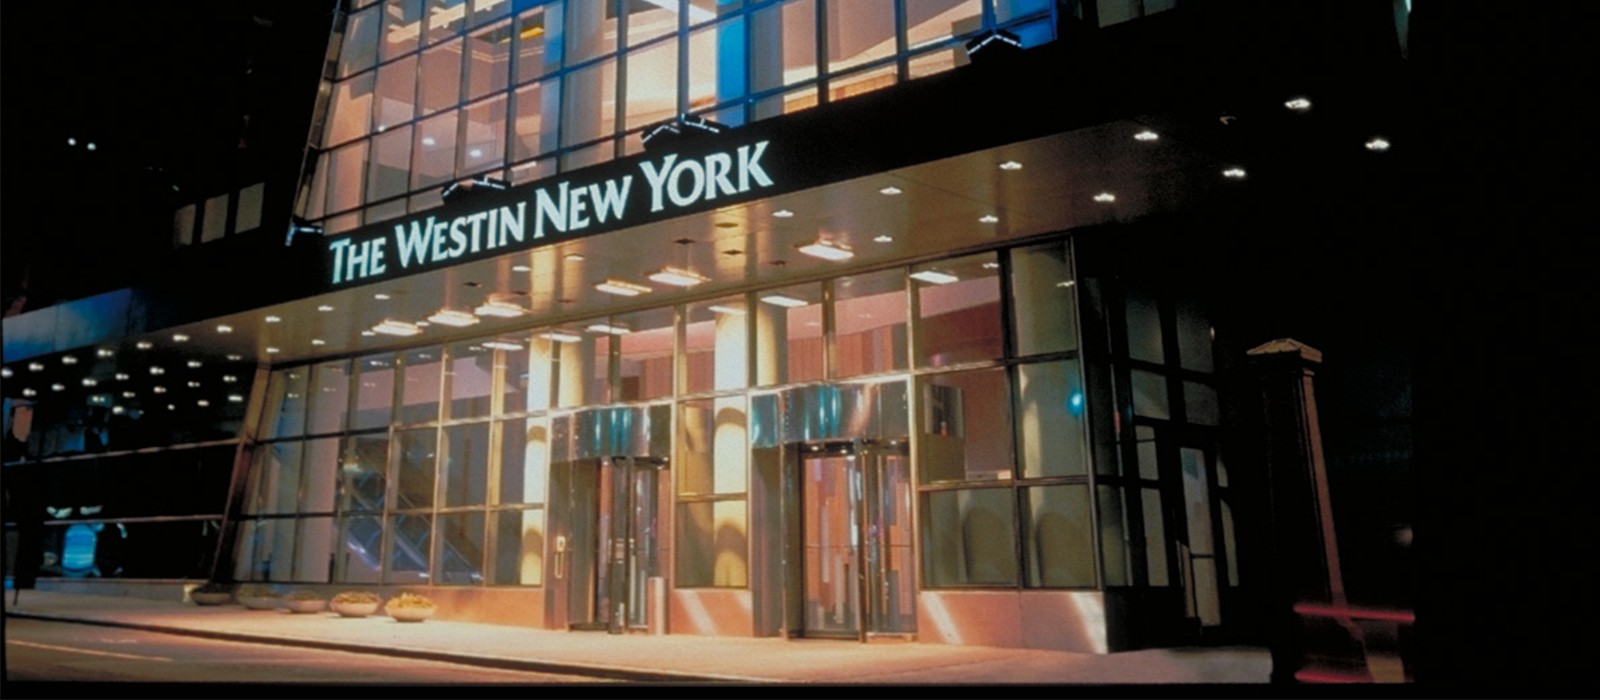 New York holidays - The Westin Times square - Header